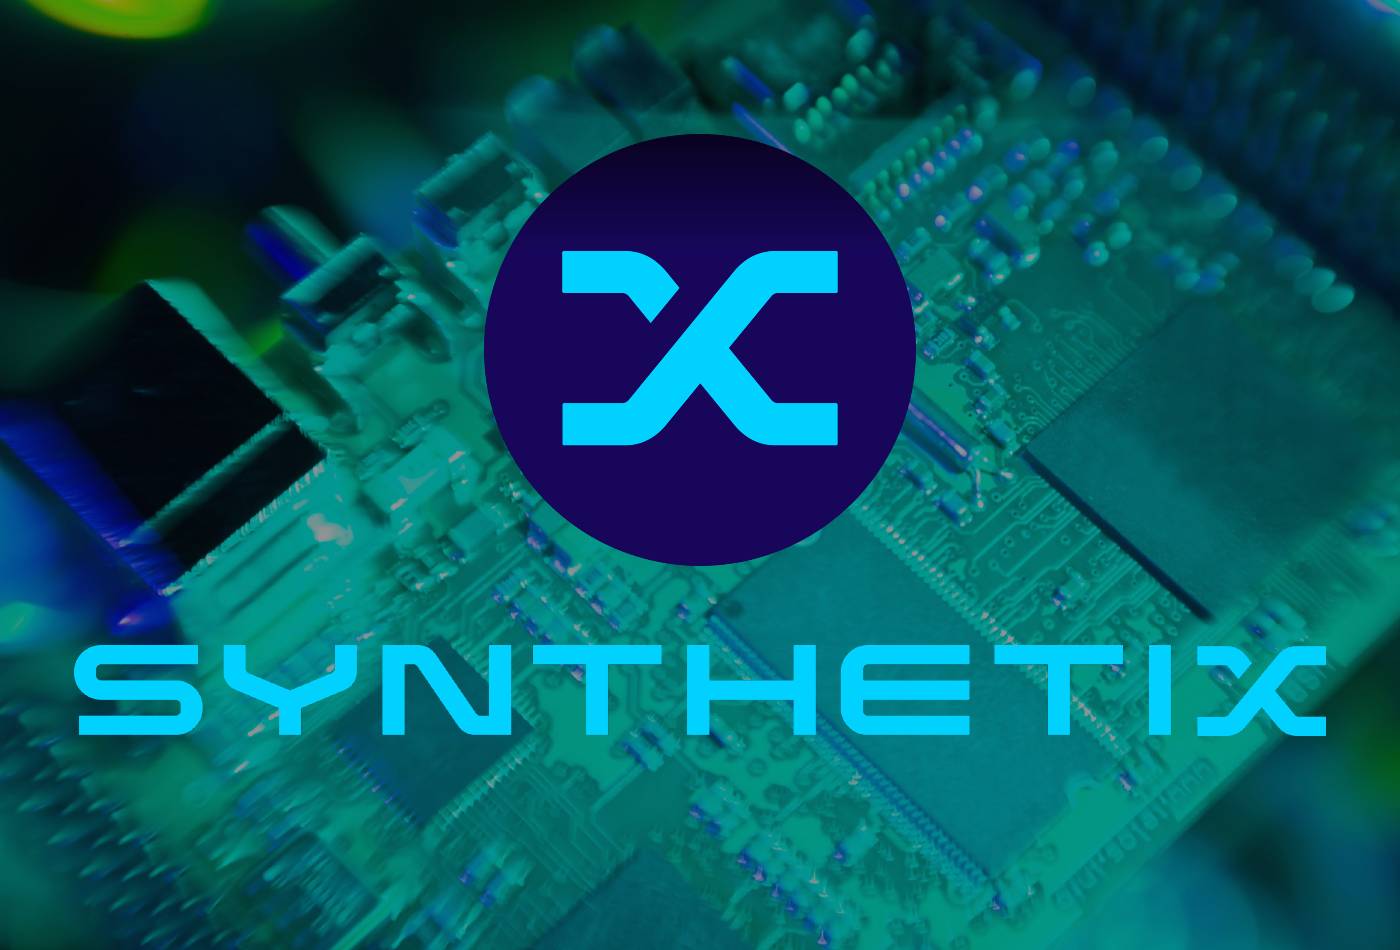 Synthetix (SNX) Price Prediction: The Best Forecast For 2022-2030